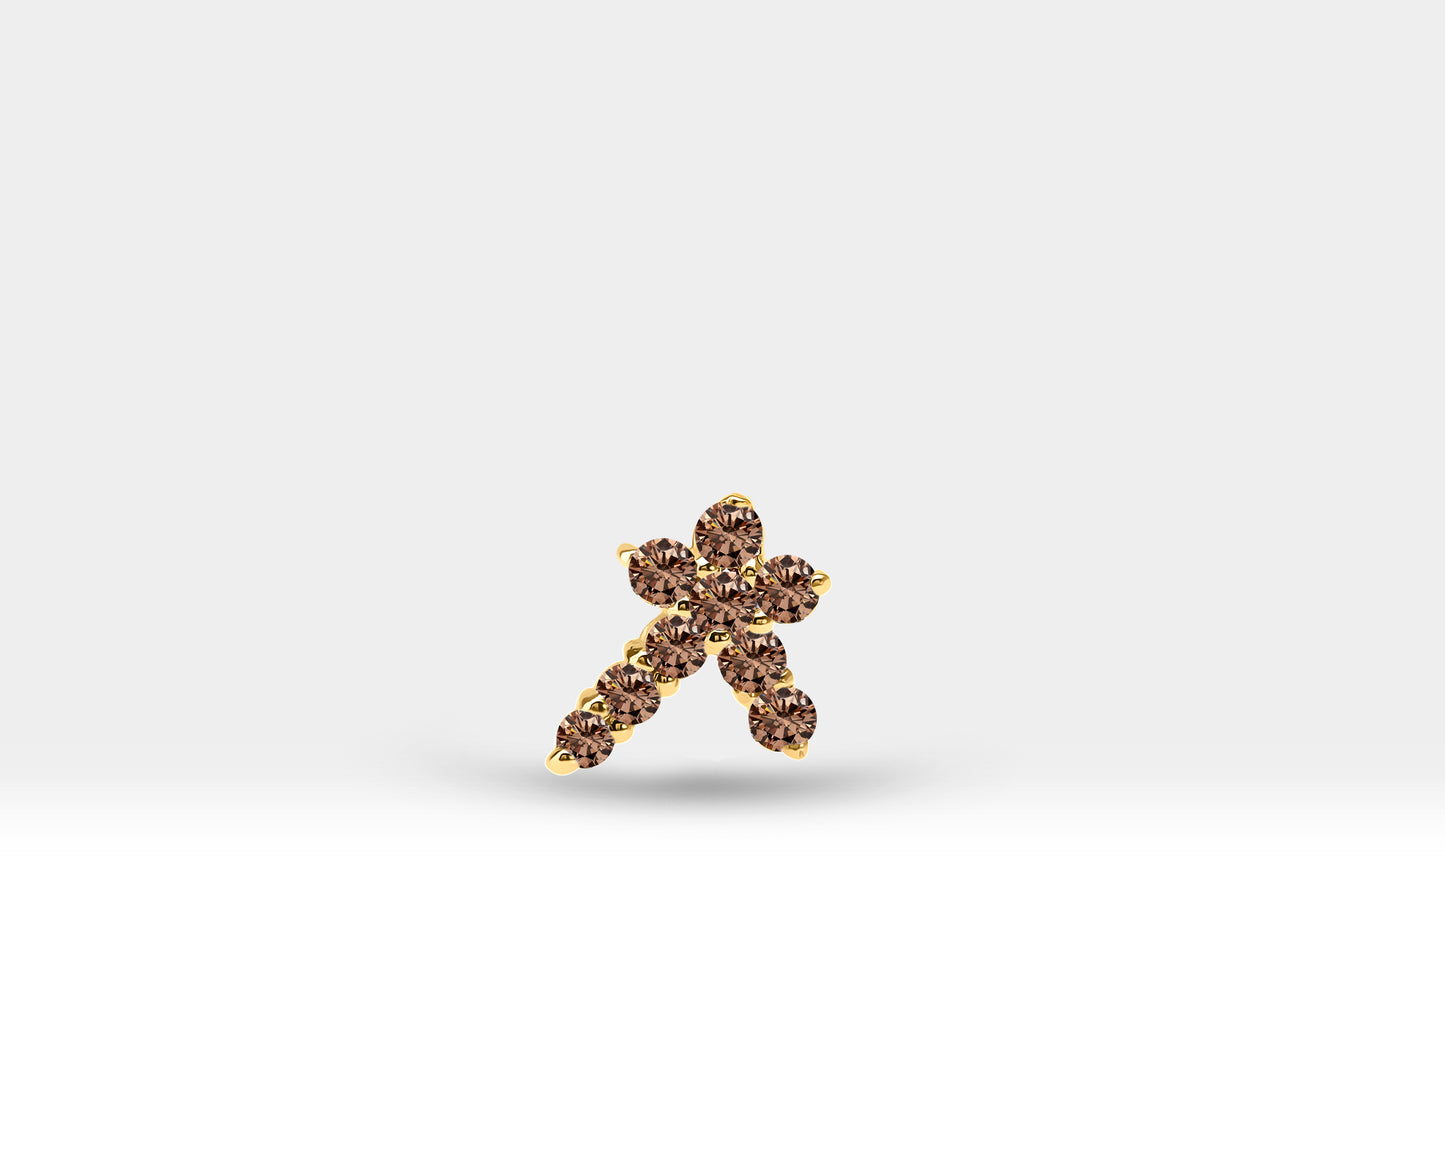 Starburst Piercing with Brown Diamond Cartilage Tragus Piercing in 14K Solid Gold Celestial Earrings